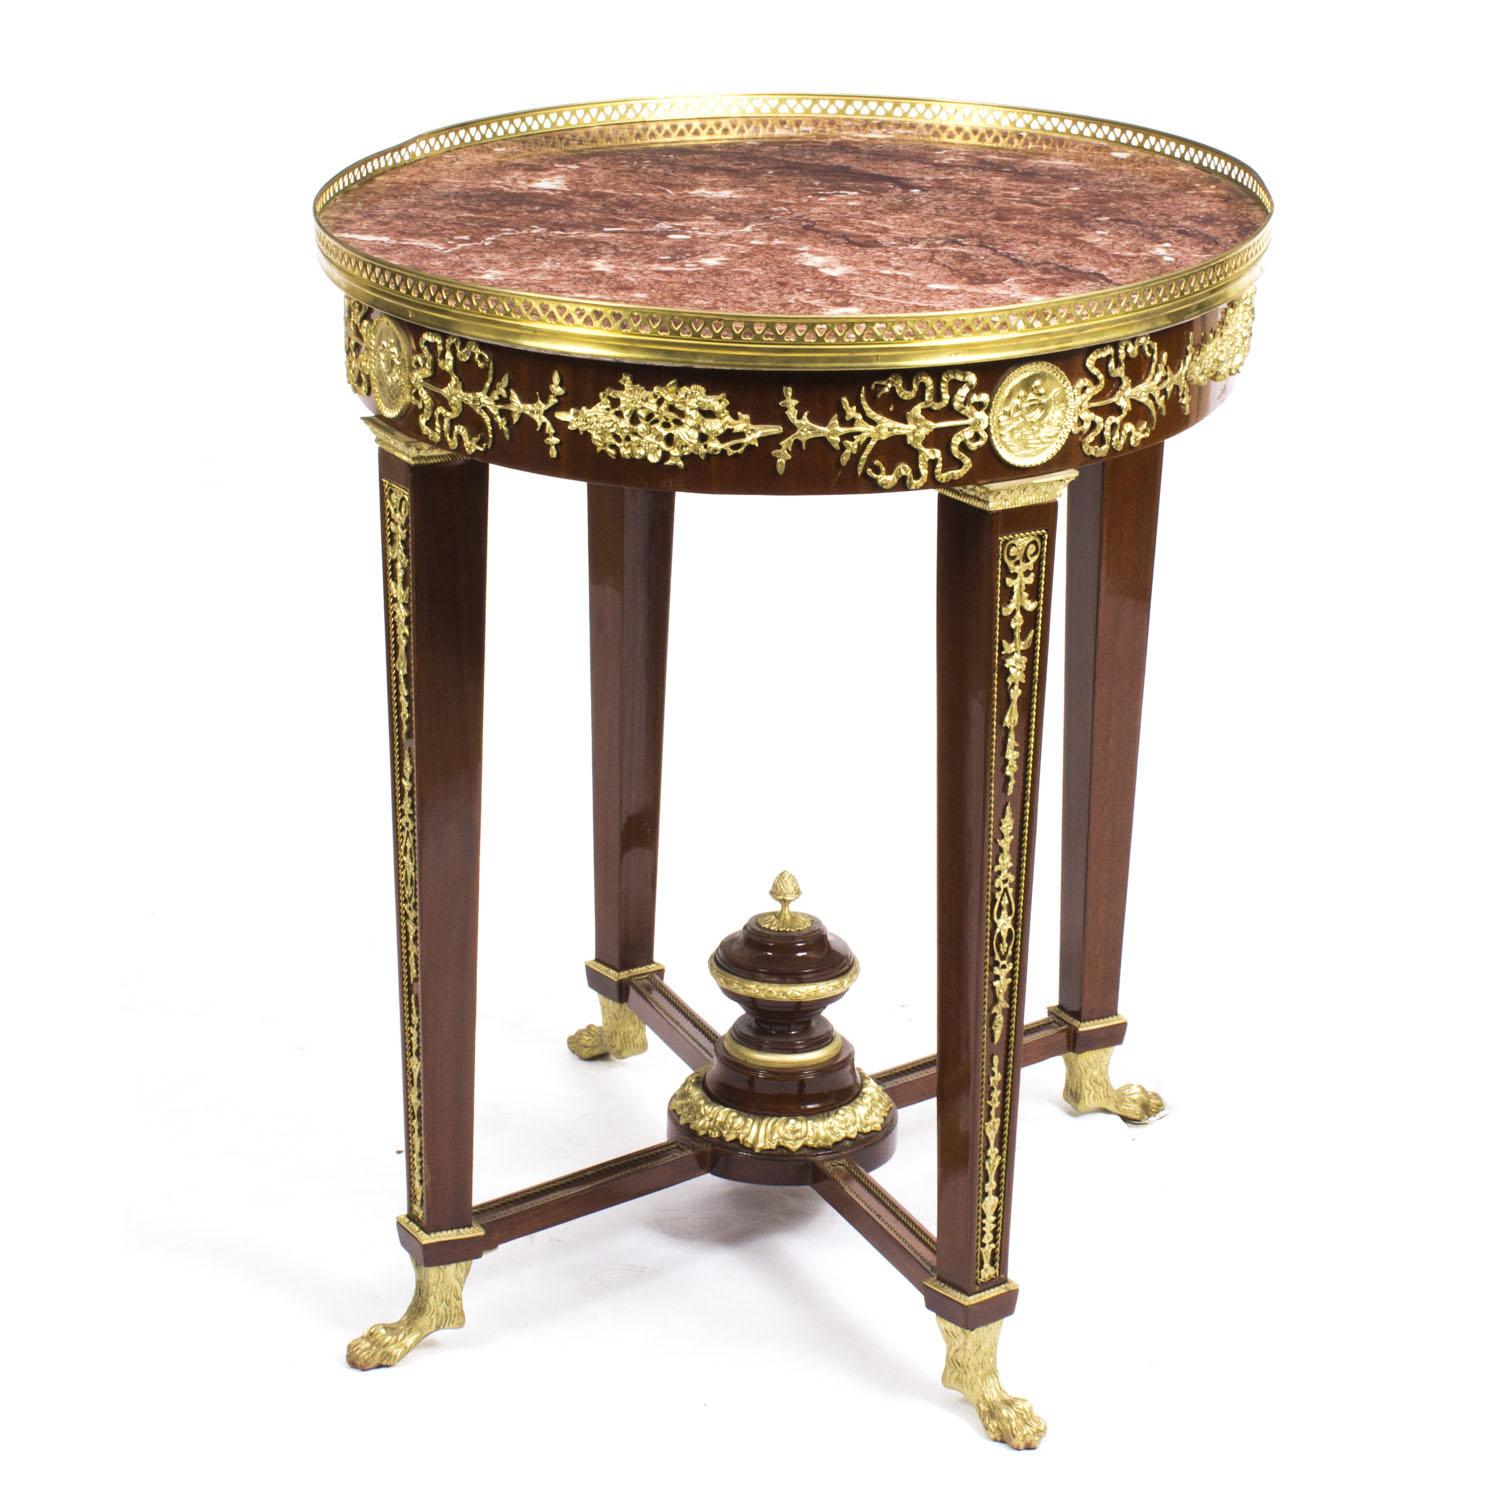 Vintage Empire Revival Marble Top Ormolu Mounted Occasional Table 20th C For Sale 10